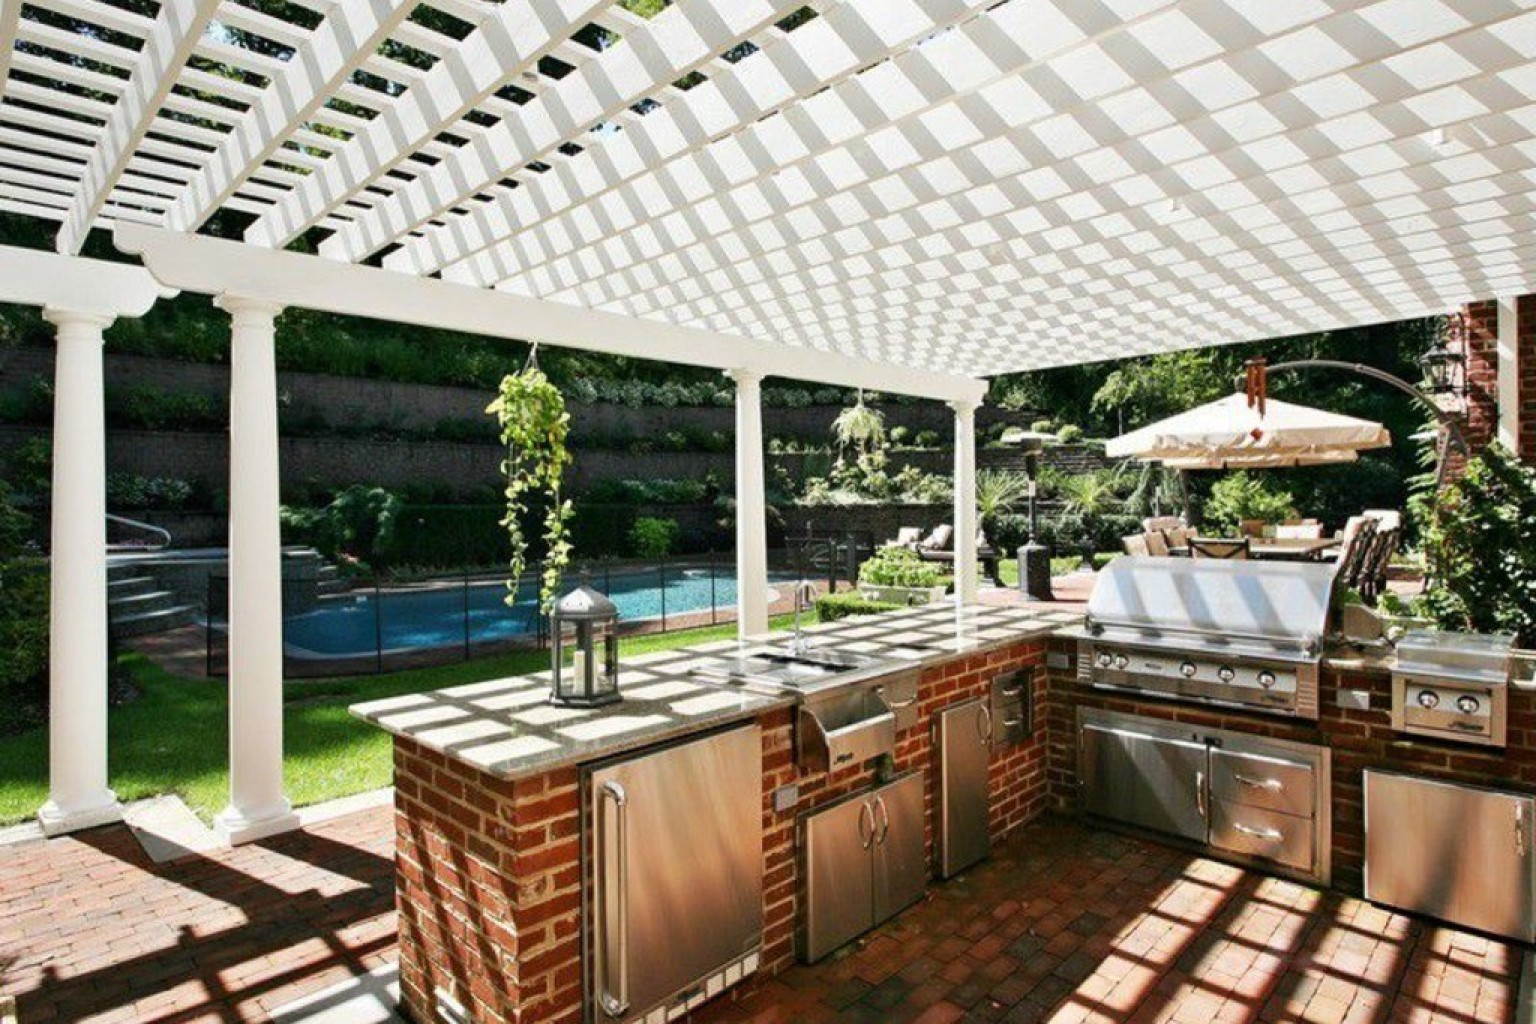 Outdoor Kitchen Patio Designs
 14 Incredible Outdoor Kitchens That Go Way Beyond Grills